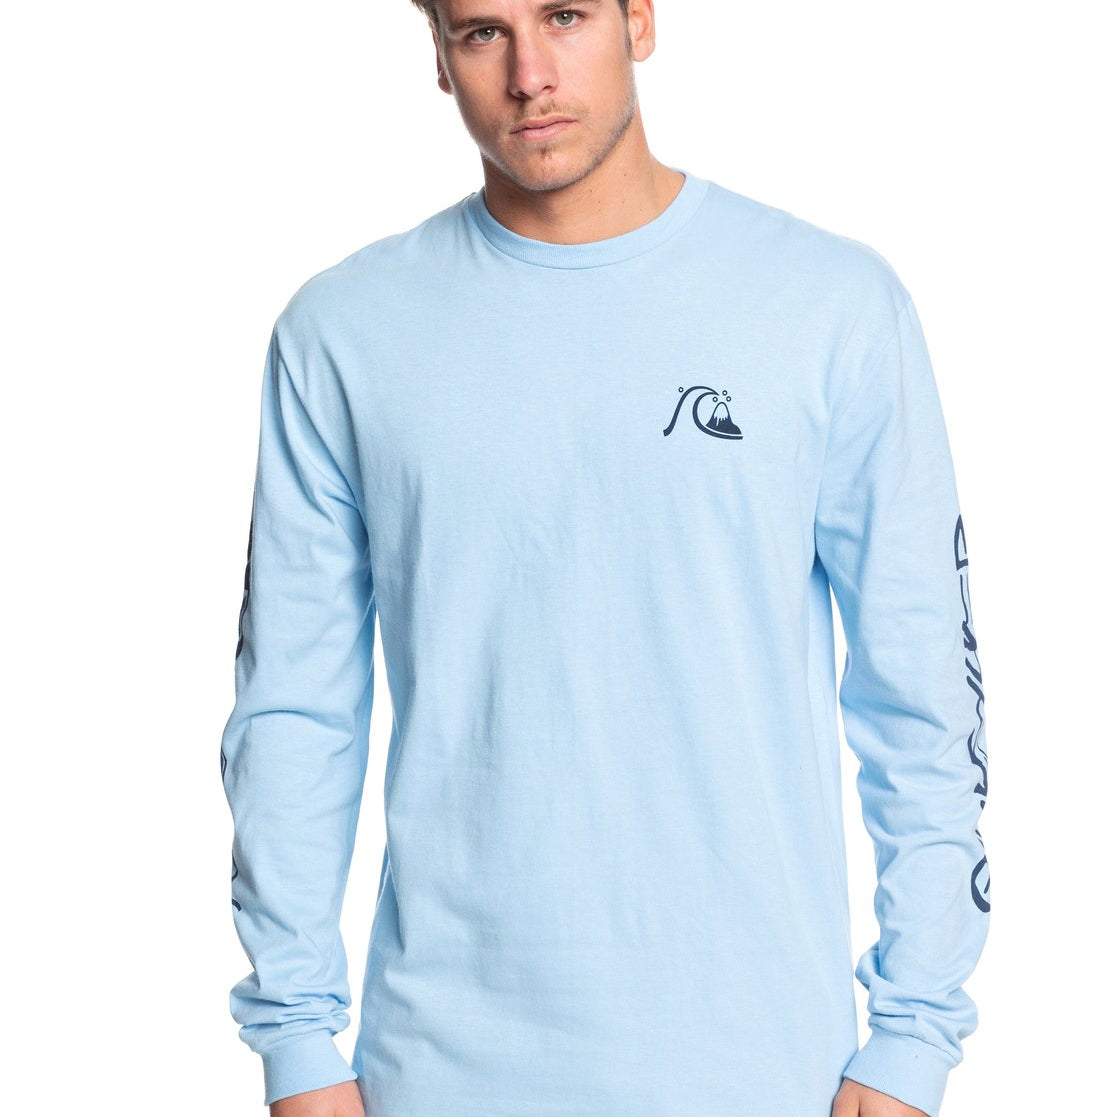 Quiksilver Too Many Rules Tee BFA0 S